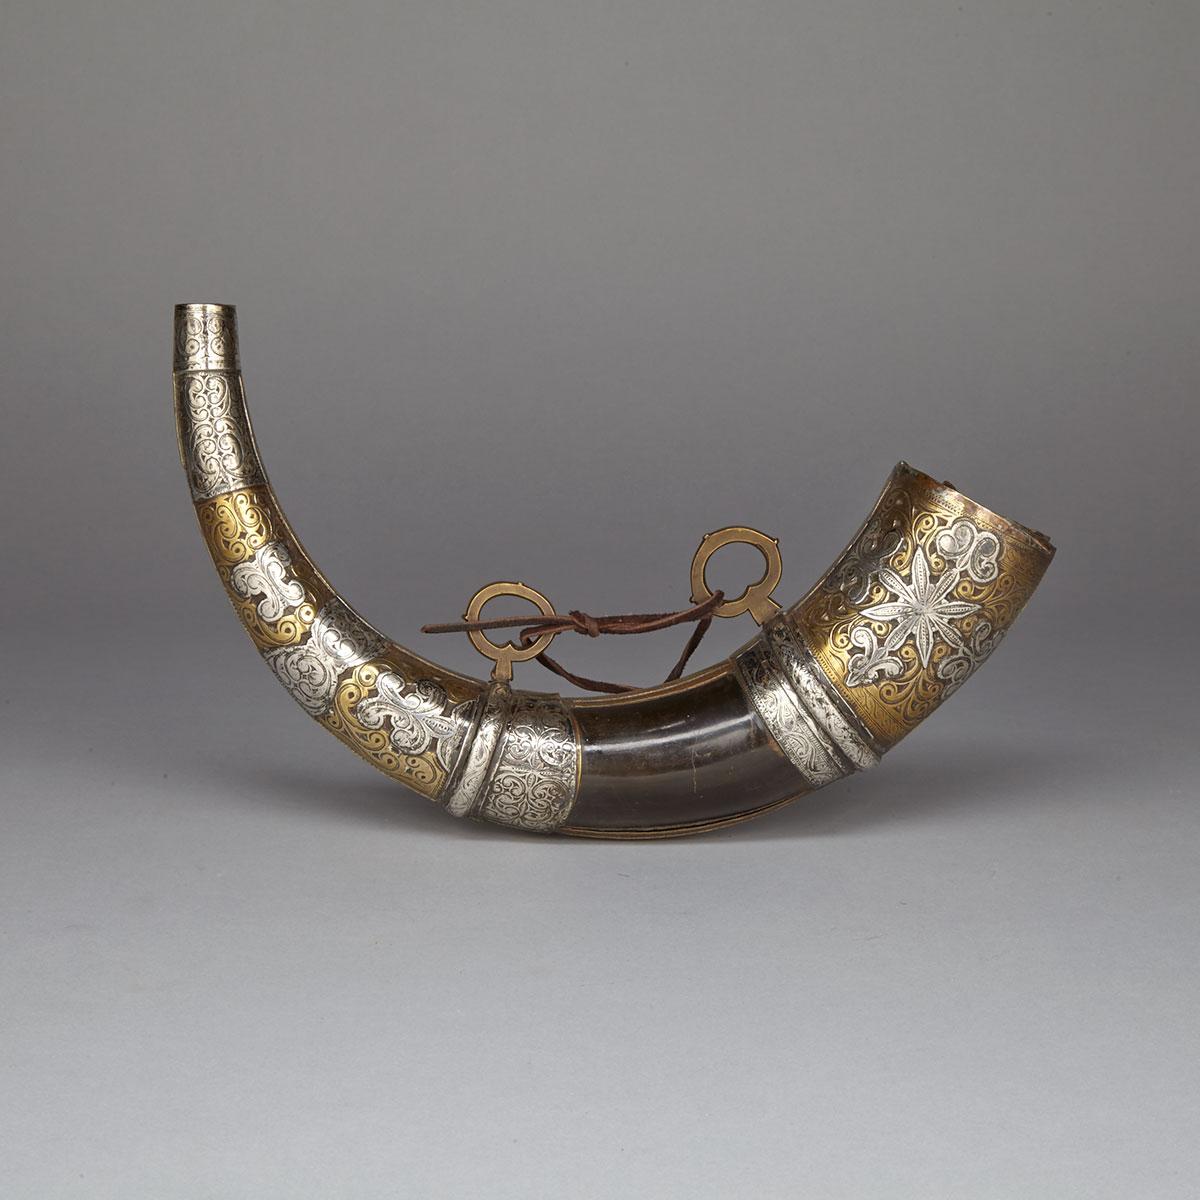 Russian Silver and brass mounted powder horn, 17th/18th century